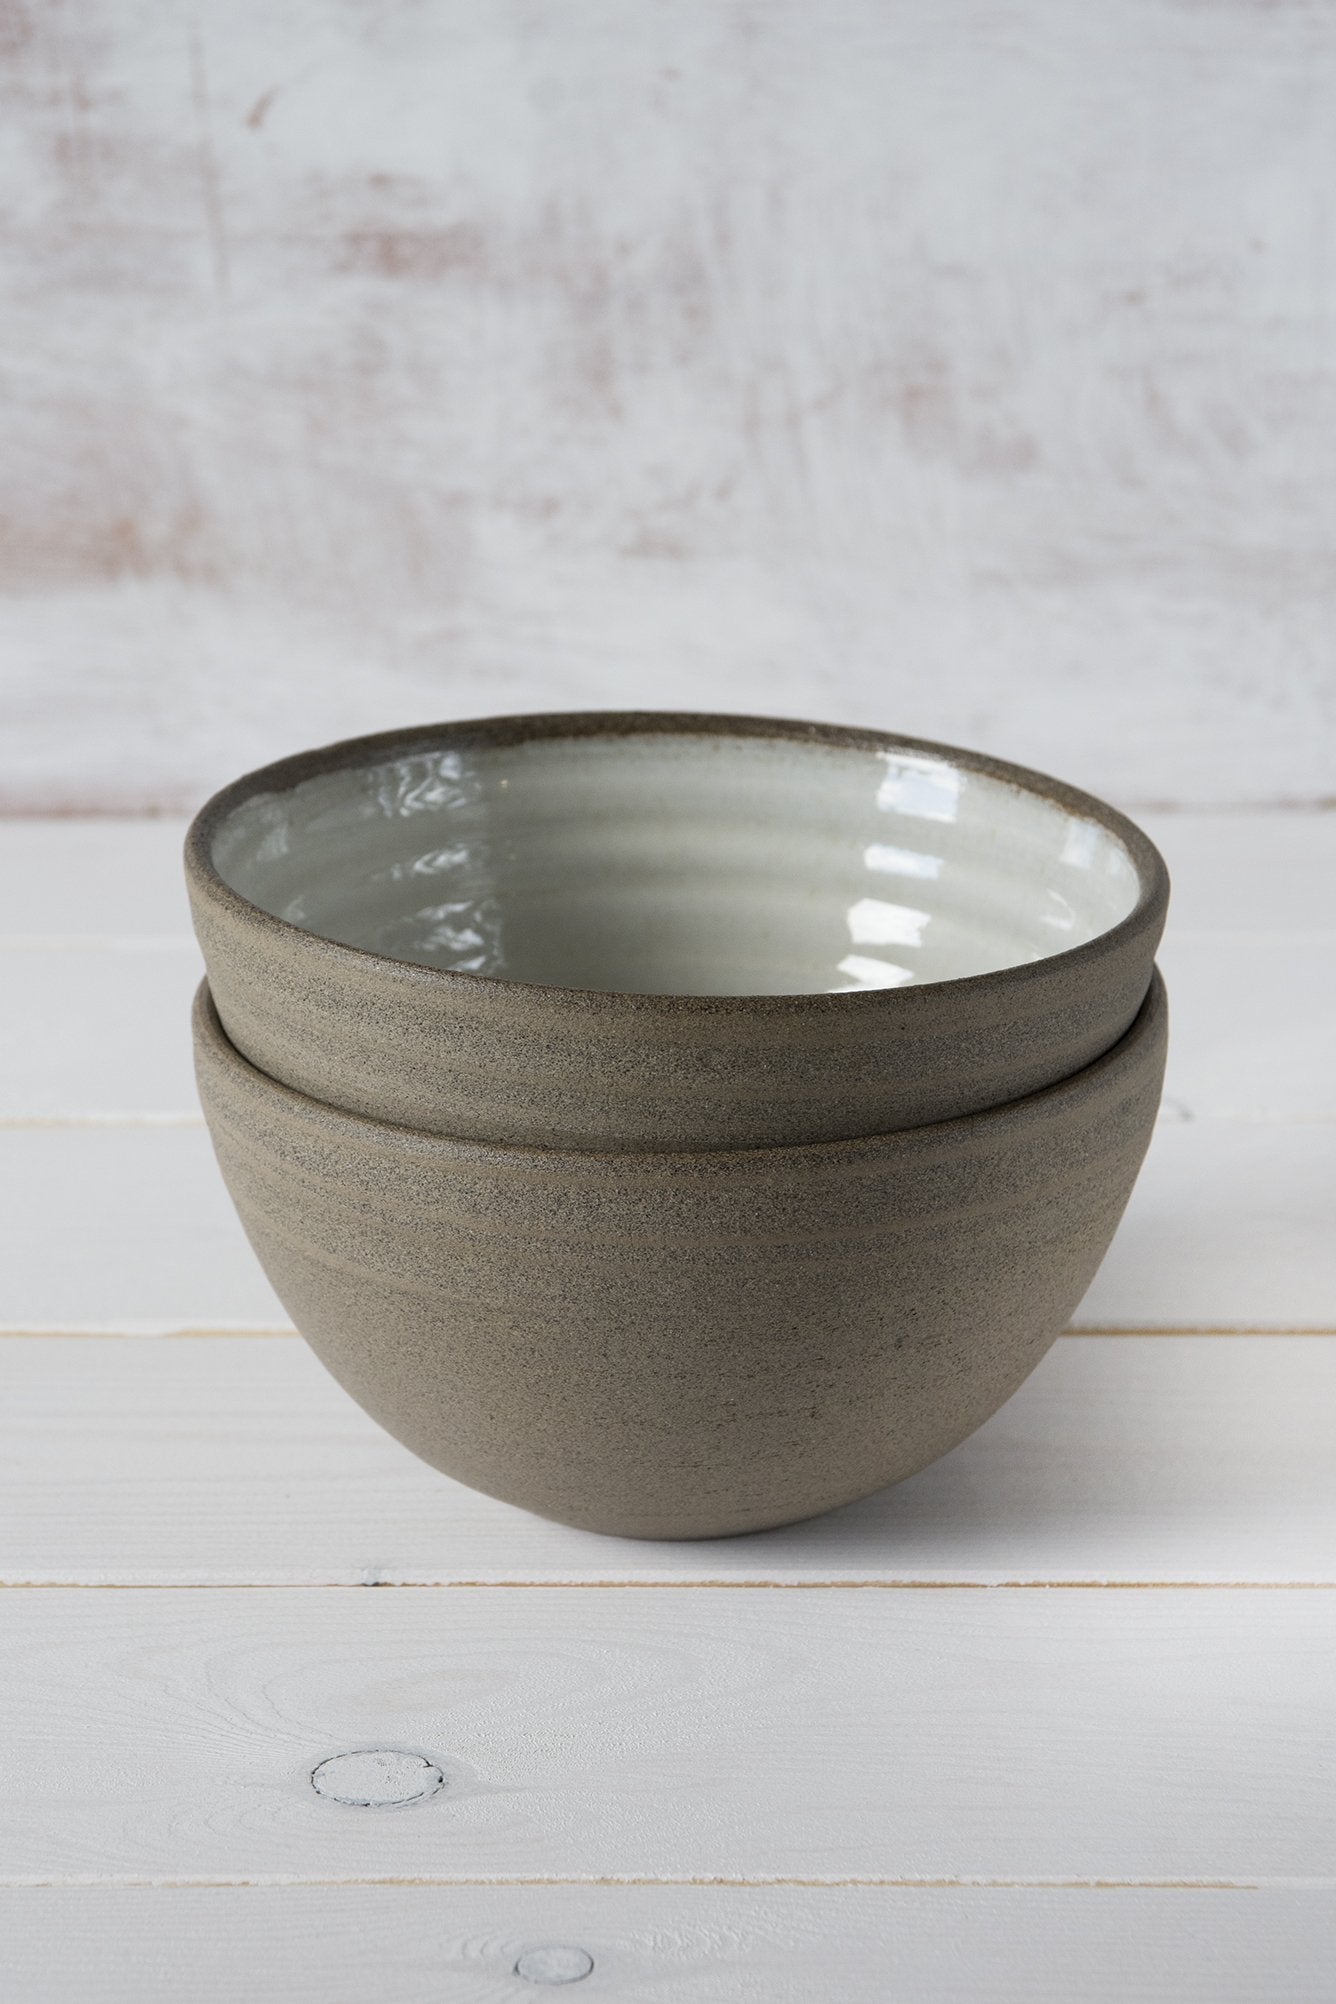 Rustic Soup Bowls, Set of 2 - Mad About Pottery- Bowl